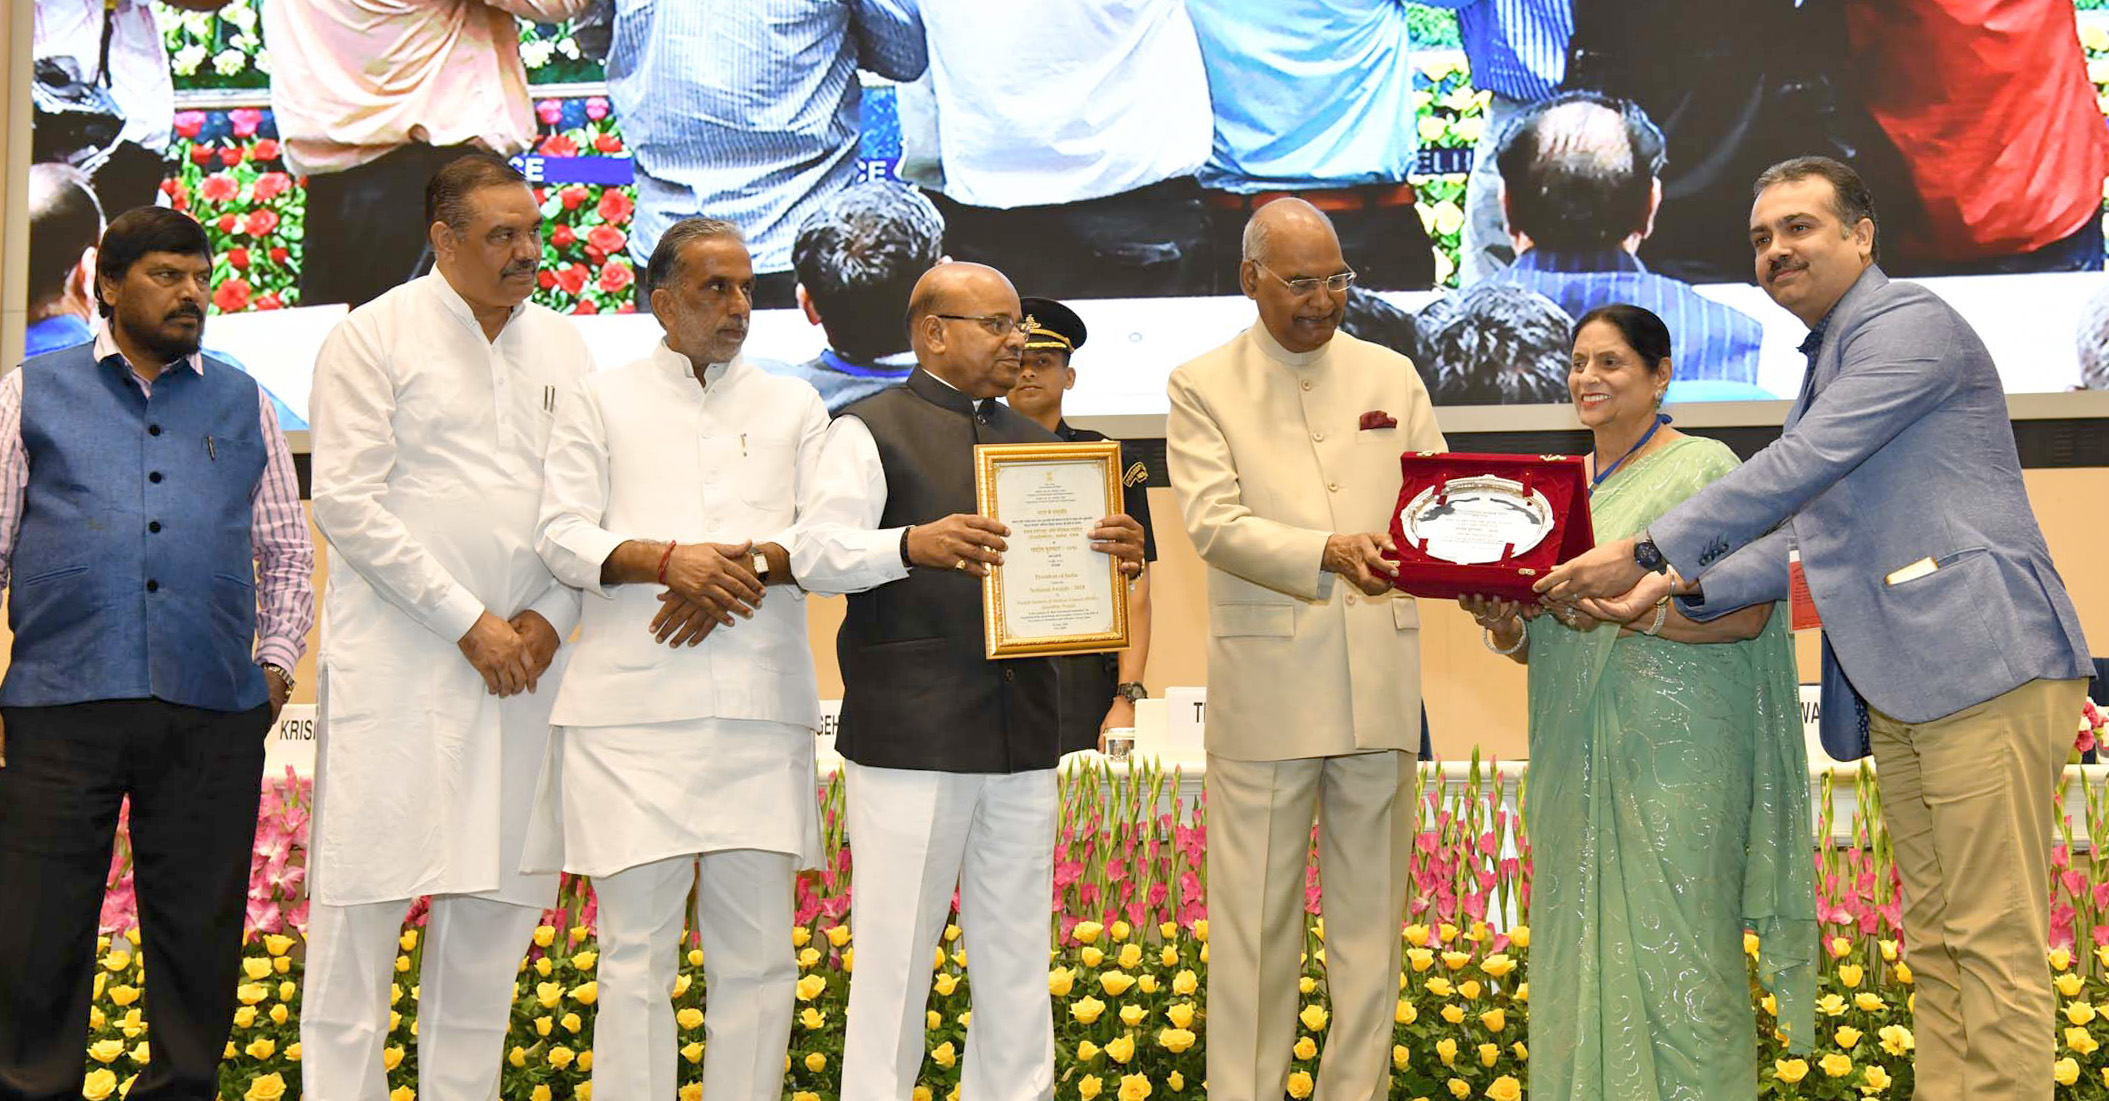 PIMS received National Award